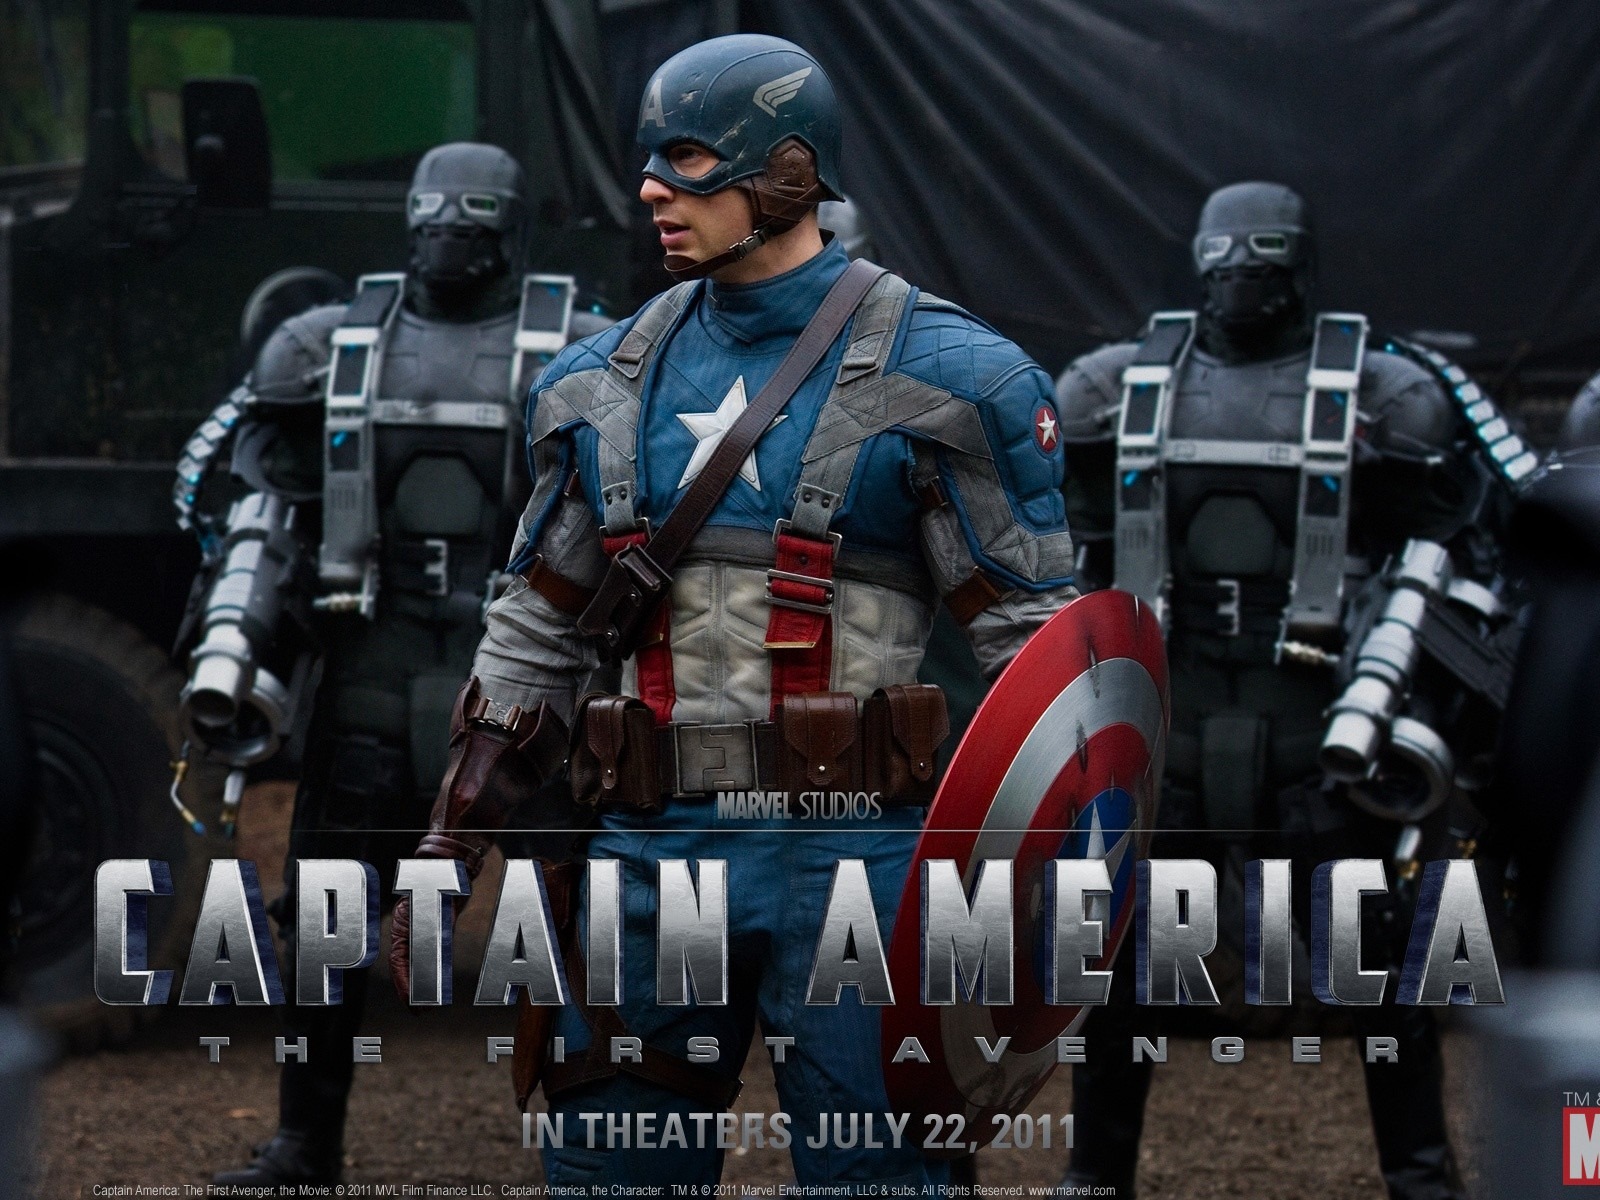 Captain America: The First Avenger wallpapers HD #21 - 1600x1200